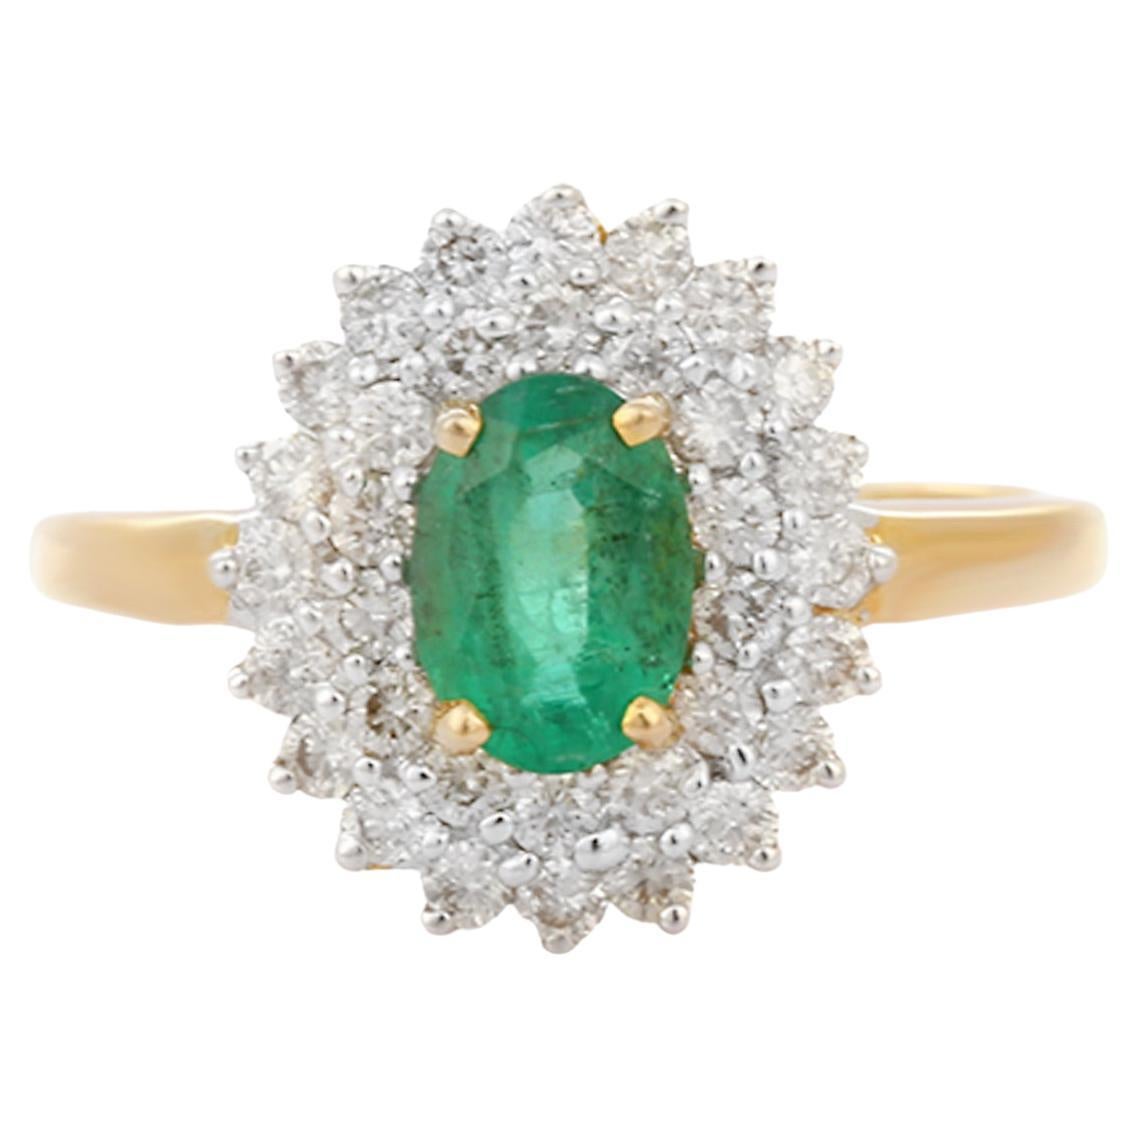 For Sale:  Exquisite 18K Yellow Gold Emerald Halo Diamond Engagement Wedding Ring for Her